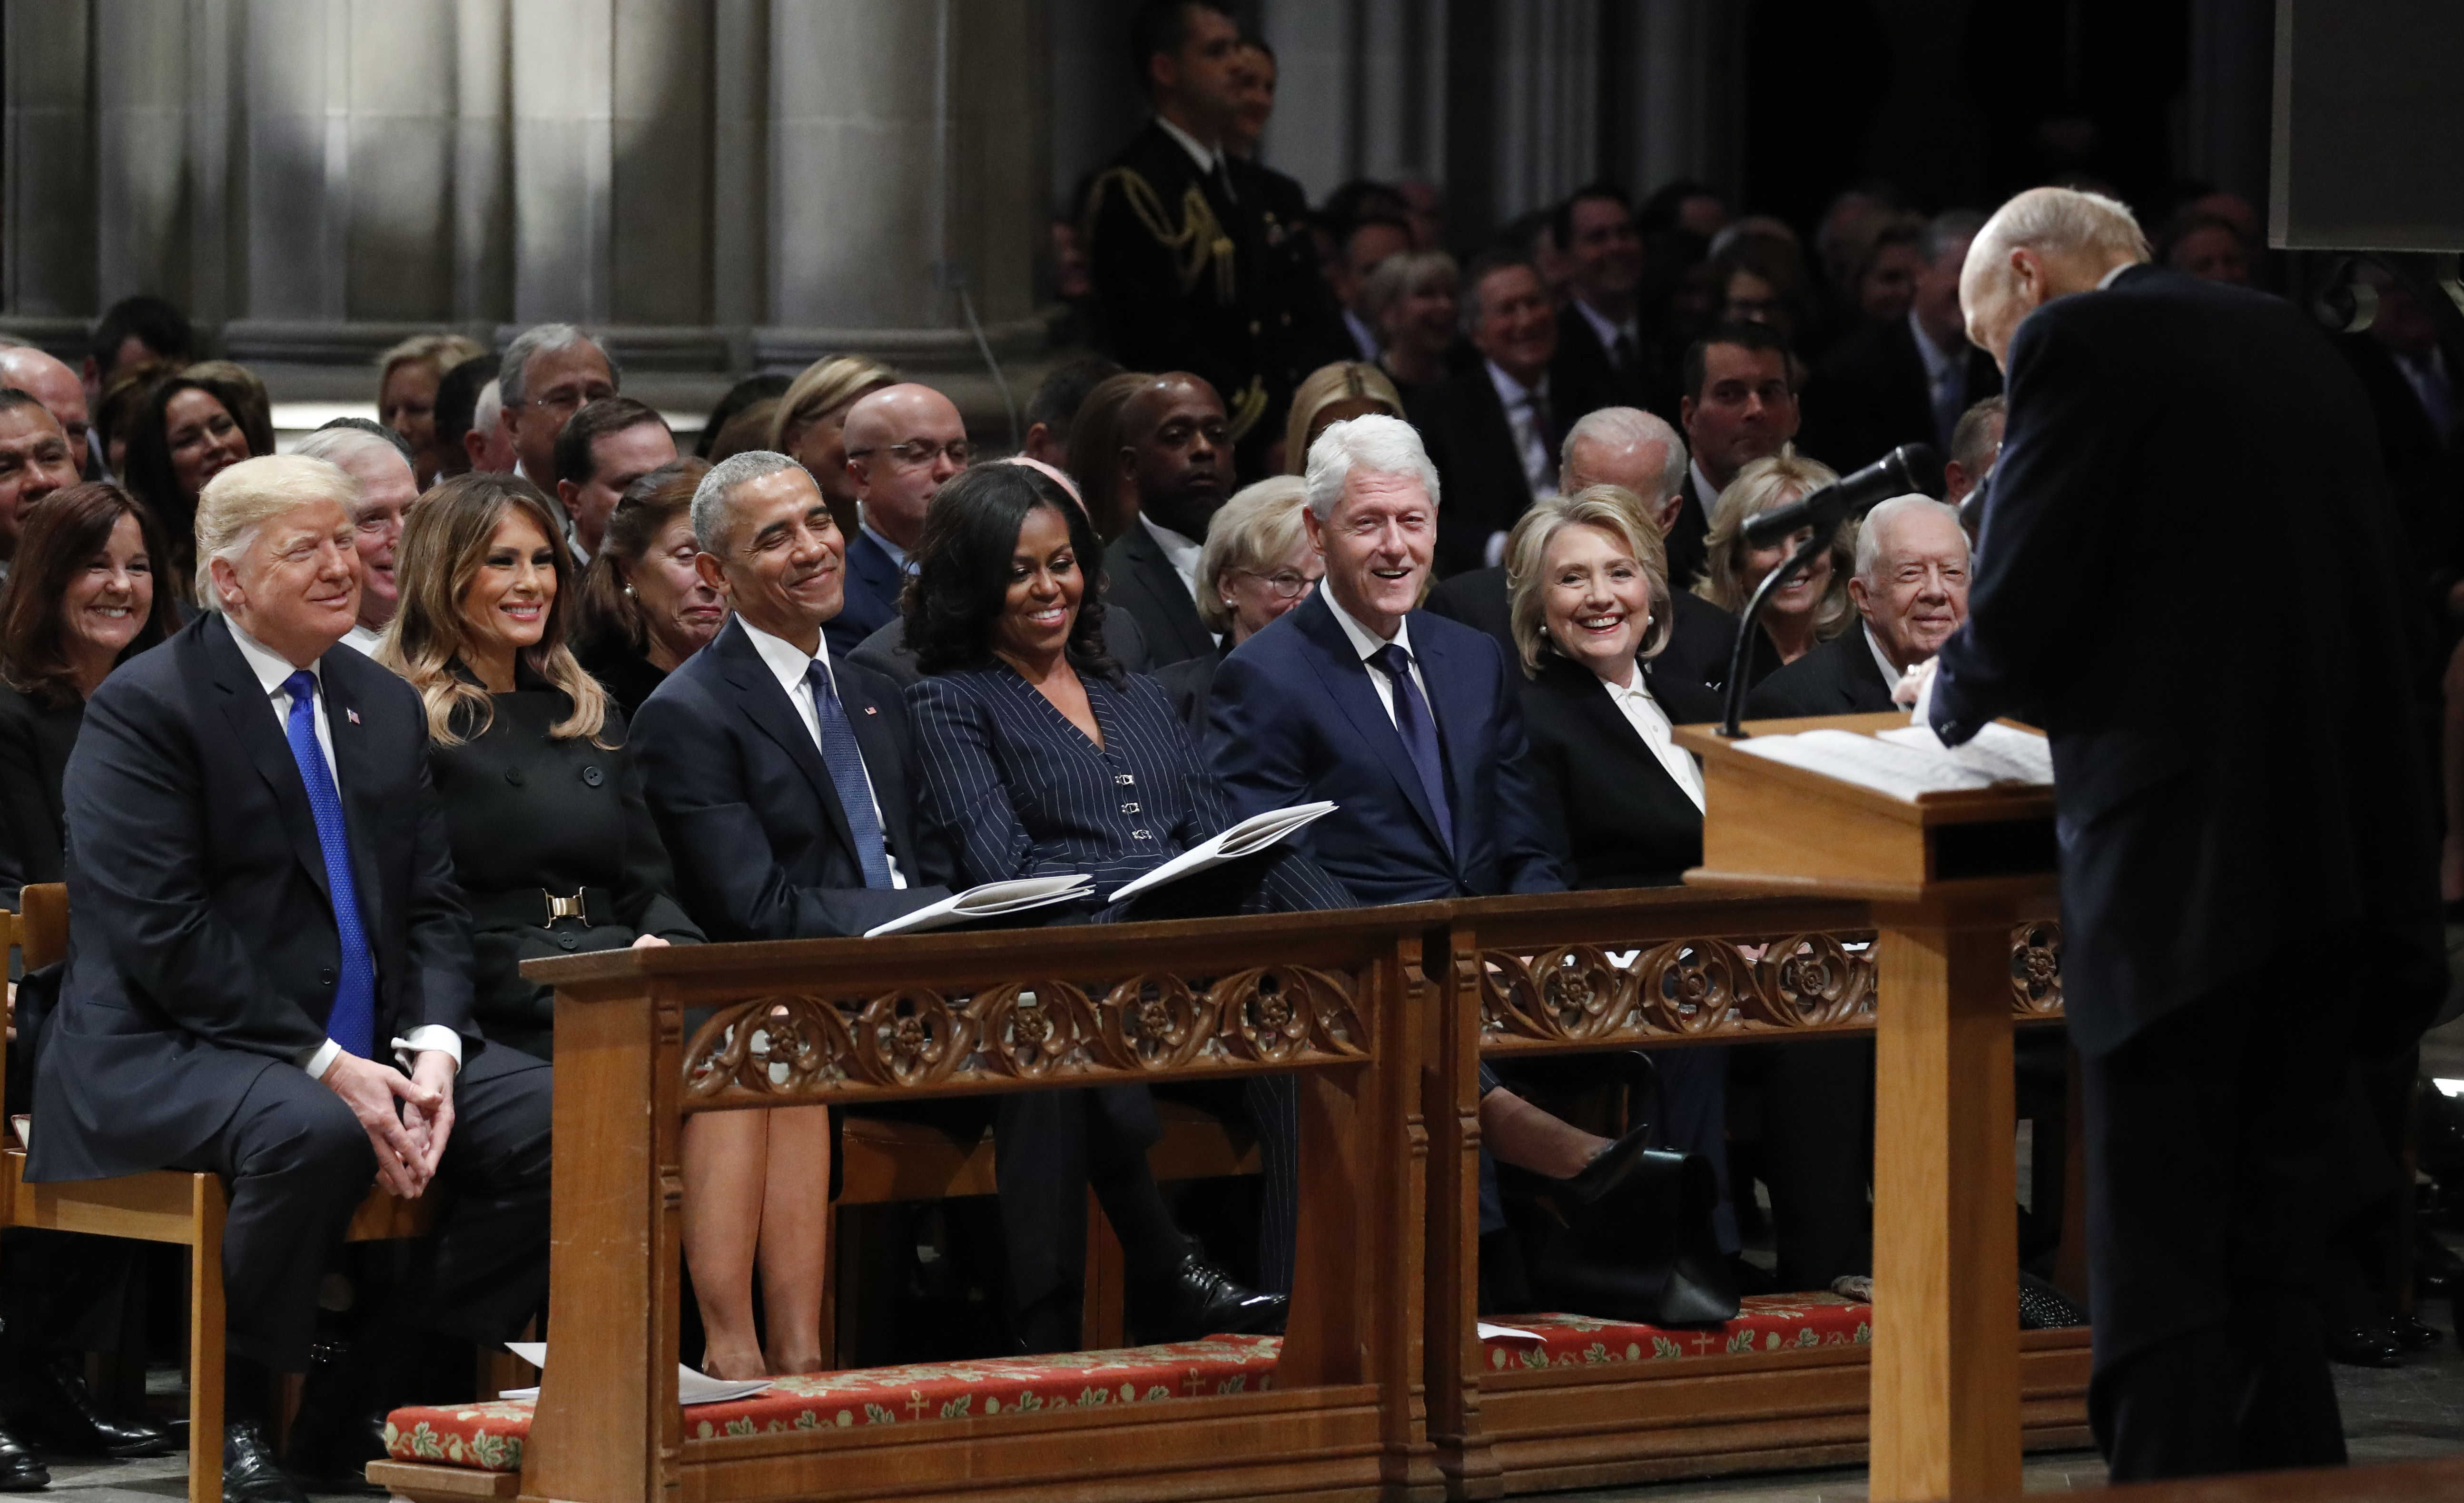 President Donald Trump, first lady Melania Trump, former President Barack Obama, Michelle Obama, former President Bill Clinton, former Secretary of State Hillary Clinton, and former President Jimmy Carter at a funeral 